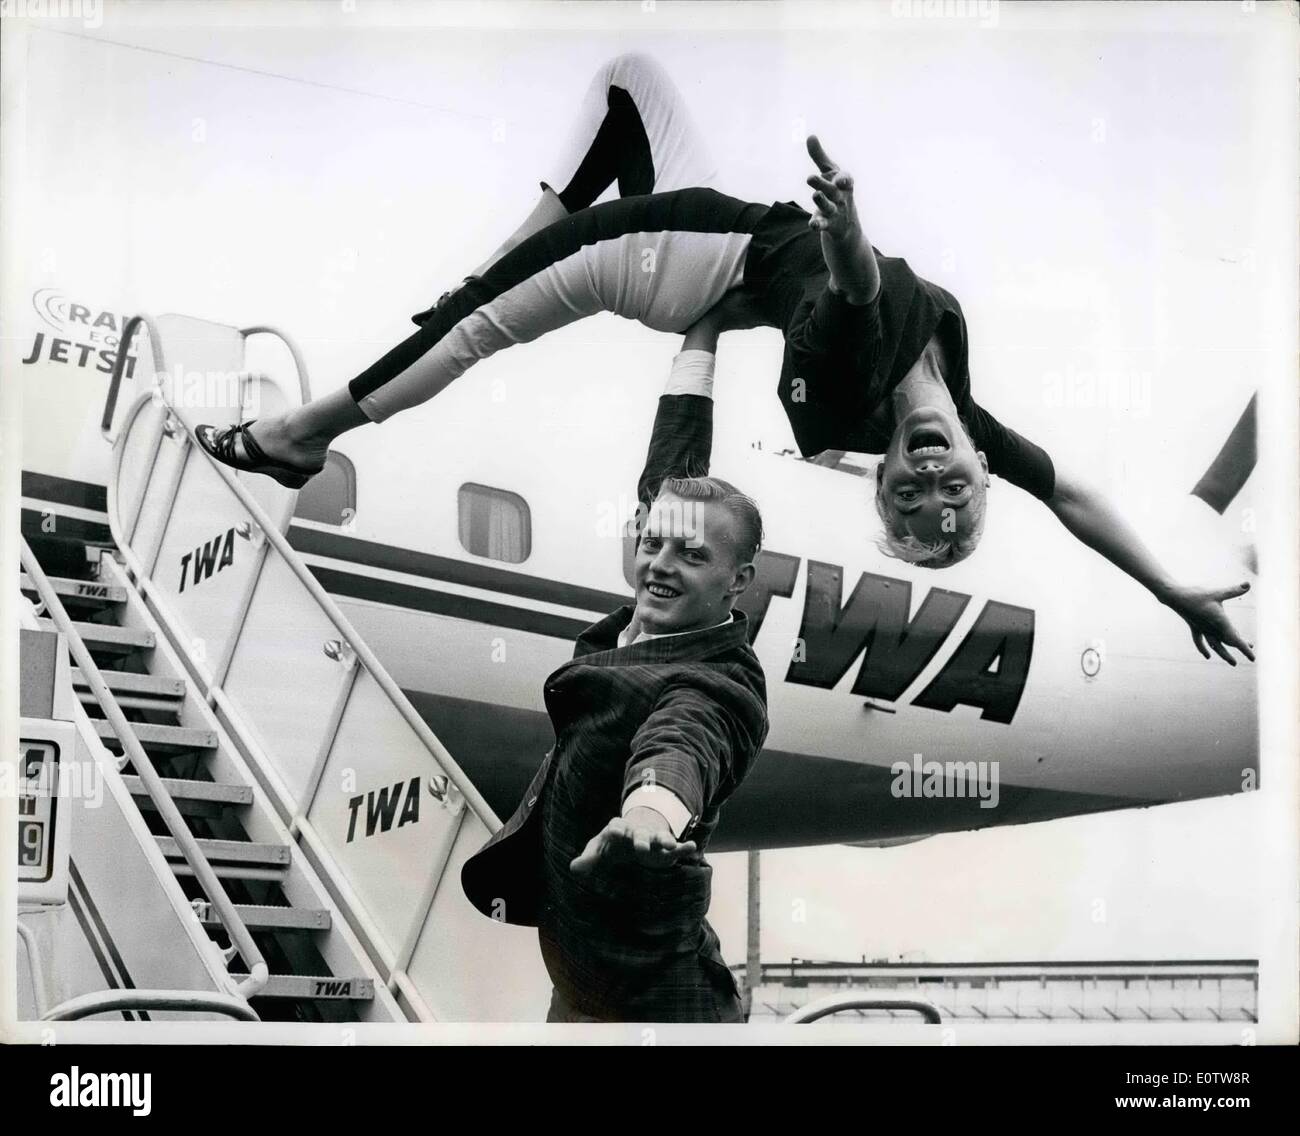 Aug. 08, 1960 - La guardia airport, august 22,1960. adagio dancers Paris and clair seem to soar through the air inspired by their flight from las Vegas via TWA, the superjet airline. the popular entertainers returned from a successful engagement in the popular gambling resort. Stock Photo